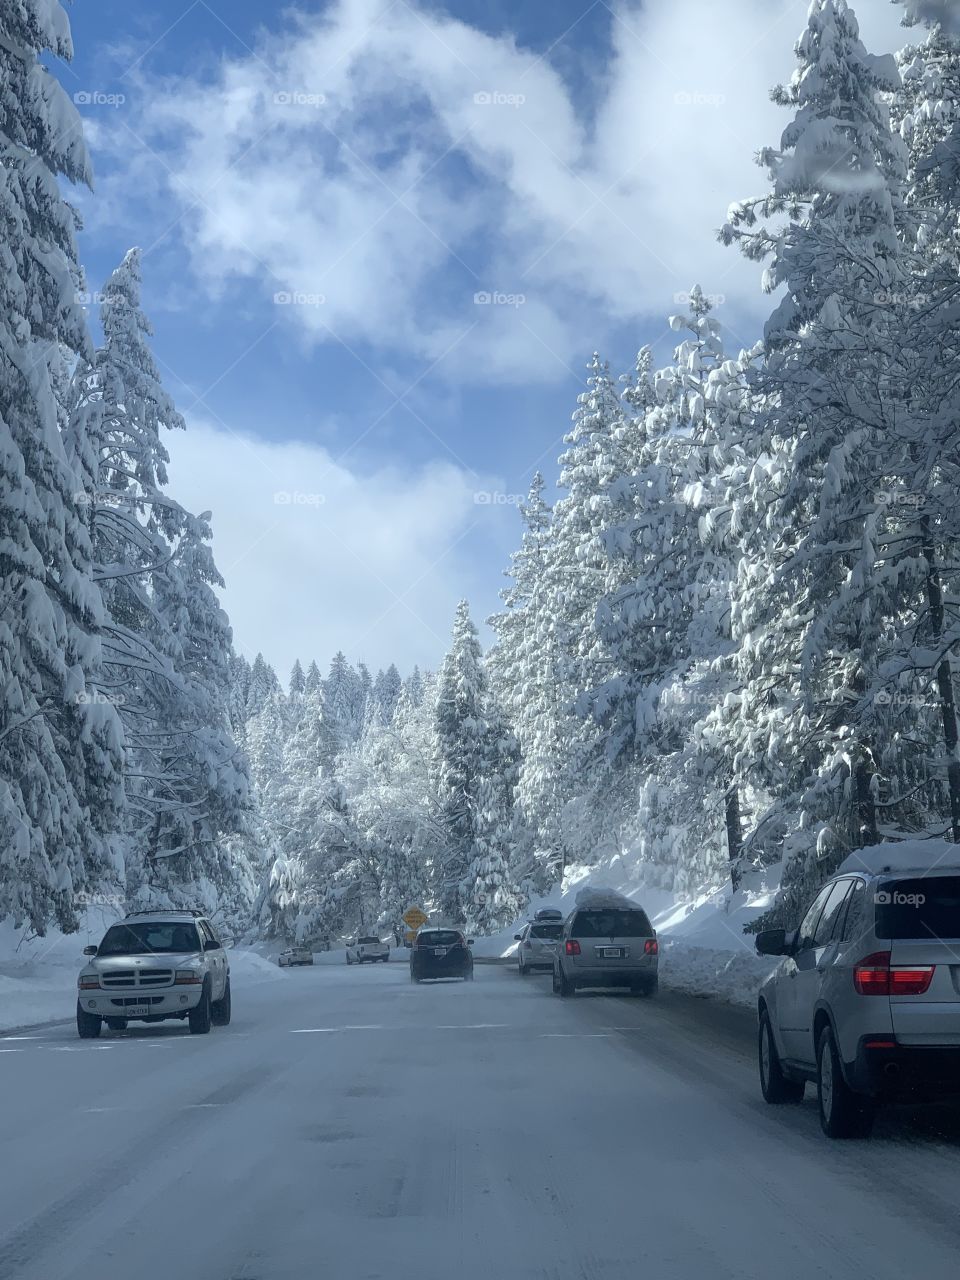 snow driving is amazing 